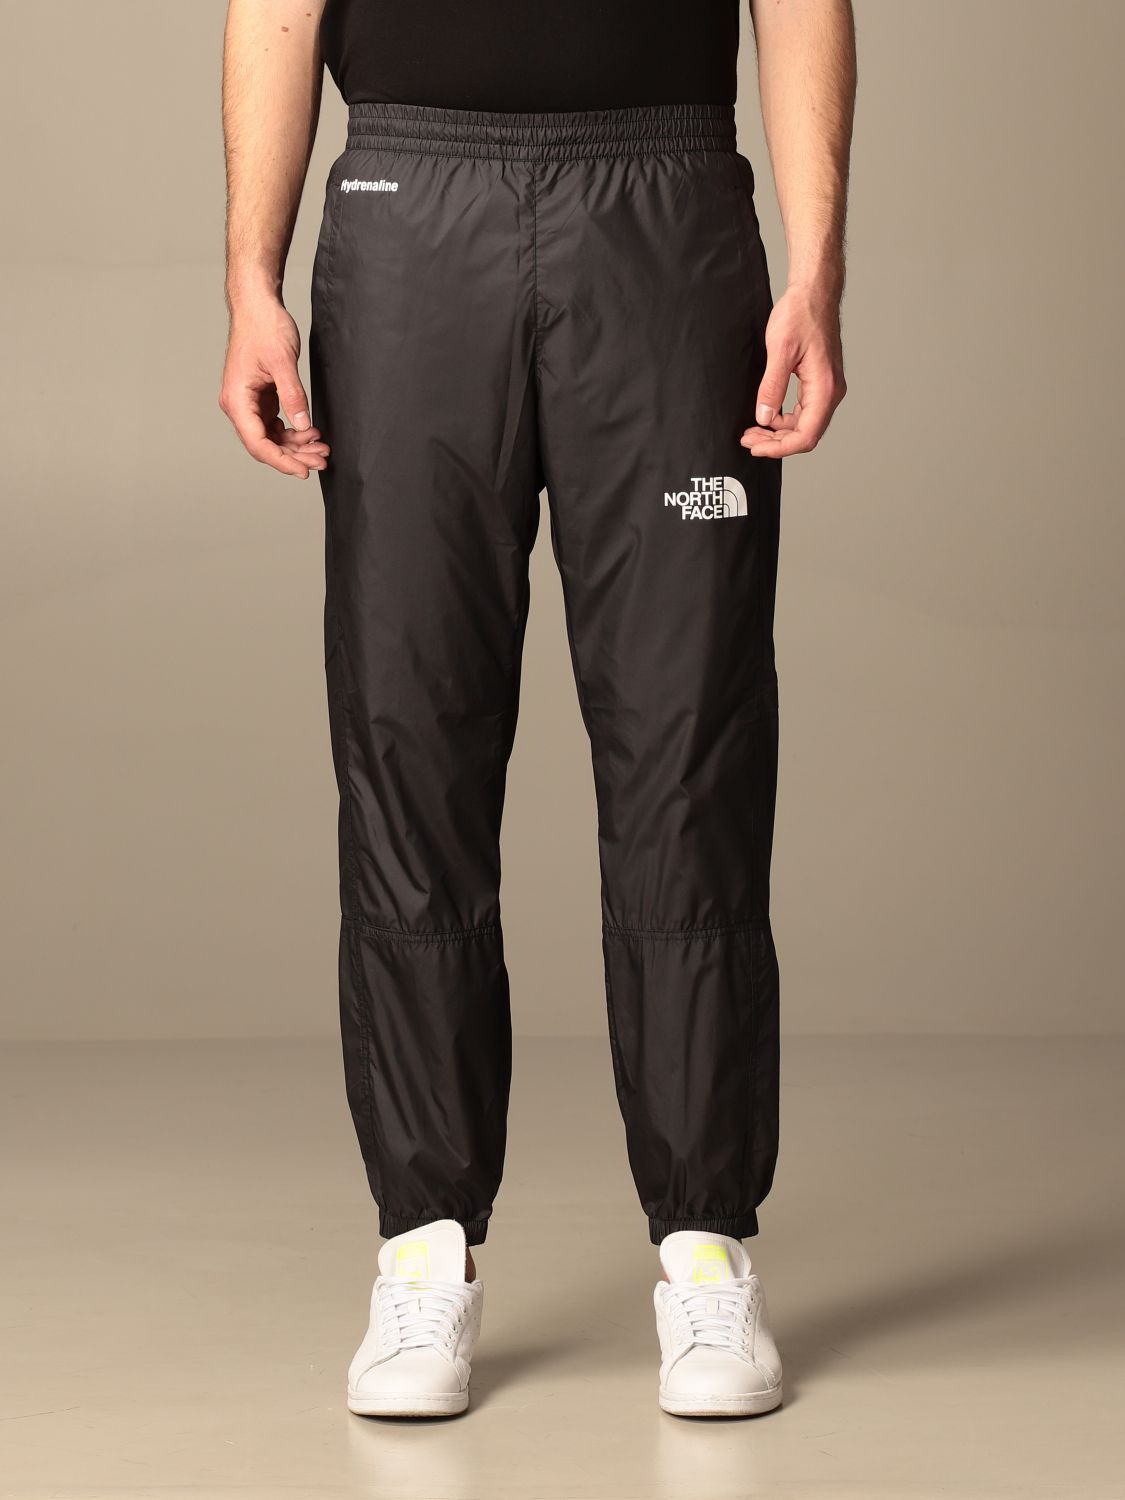 Buy > mens the north face cargo pants > in stock